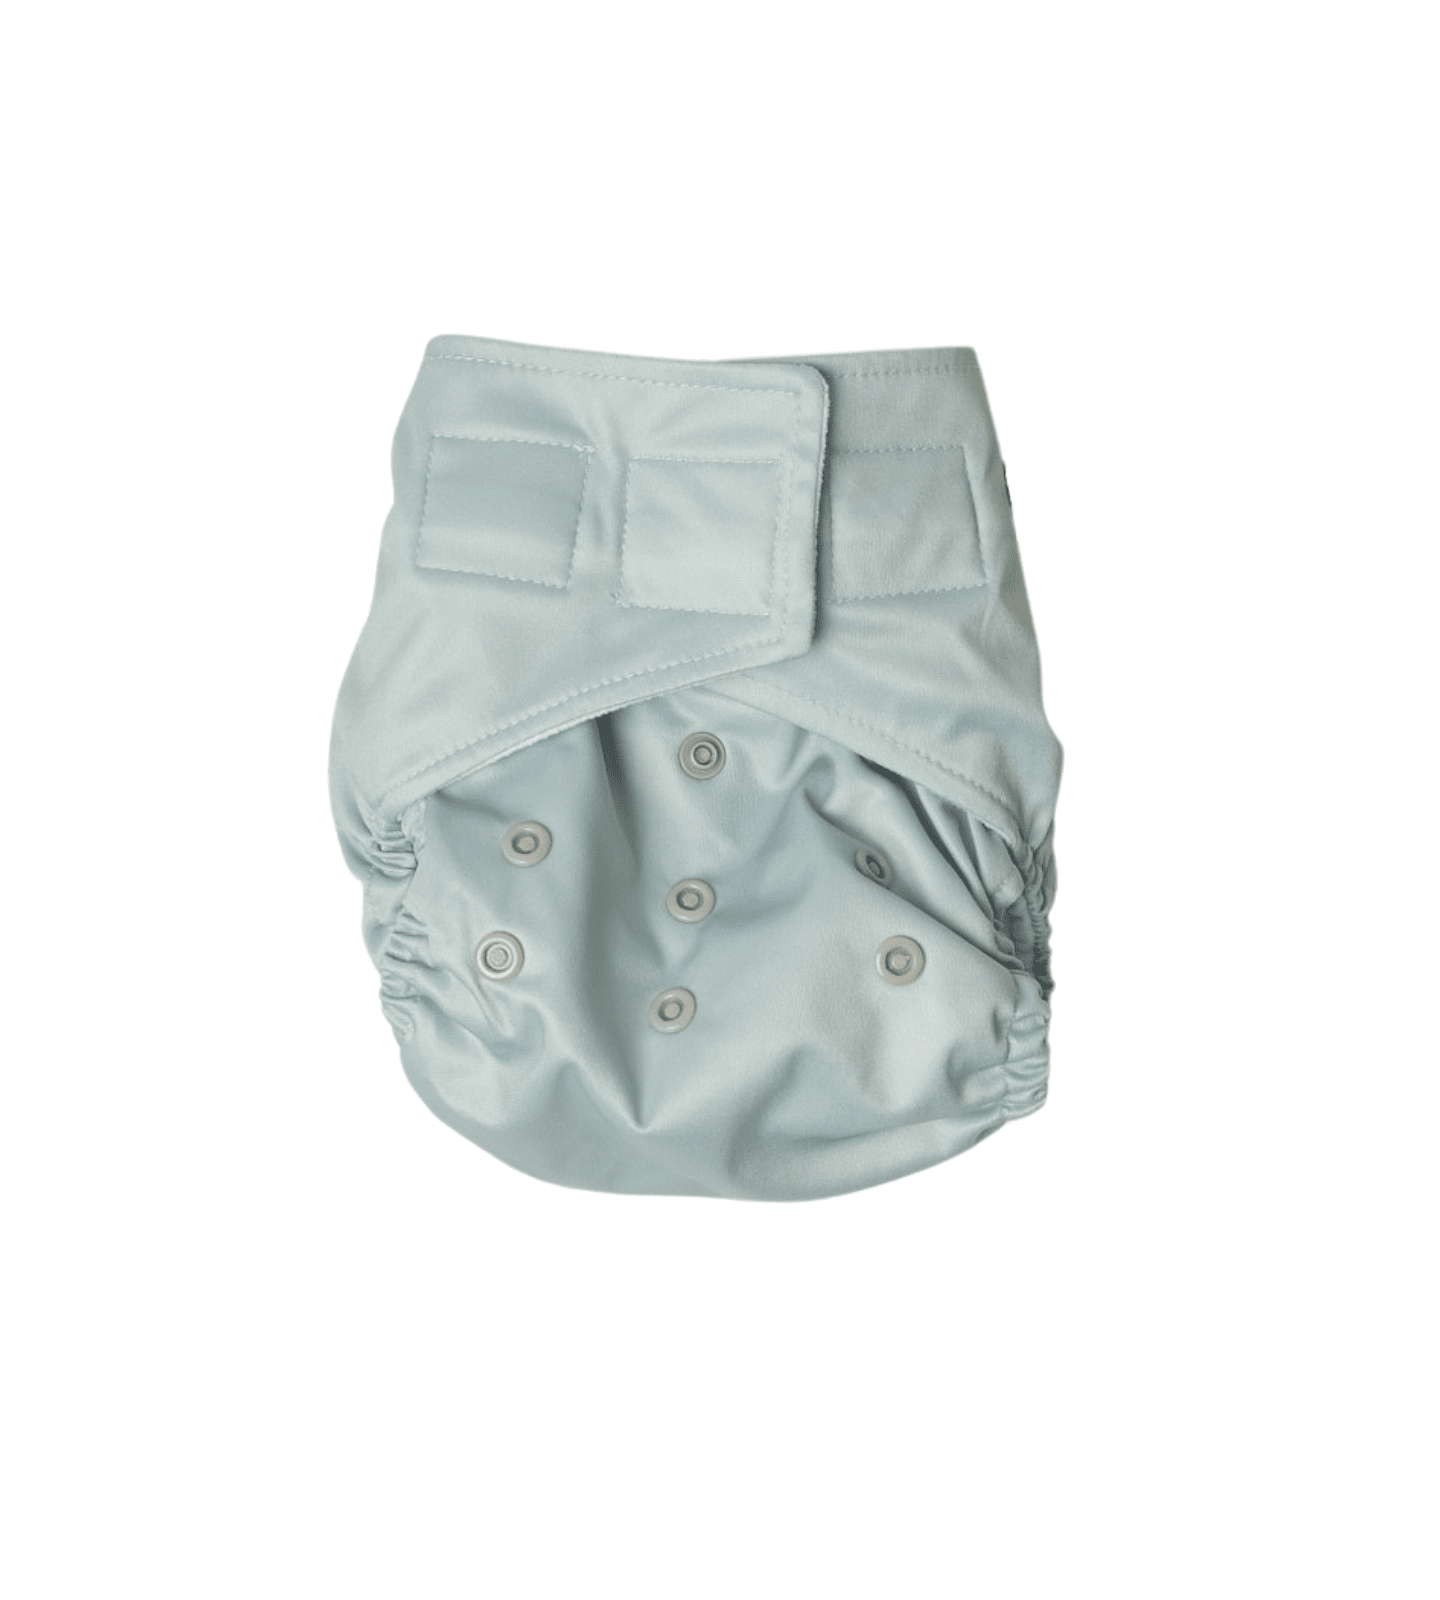 Snazzi Pants All in One Cloth Nappy - Brolly Sheets NZ - Sage